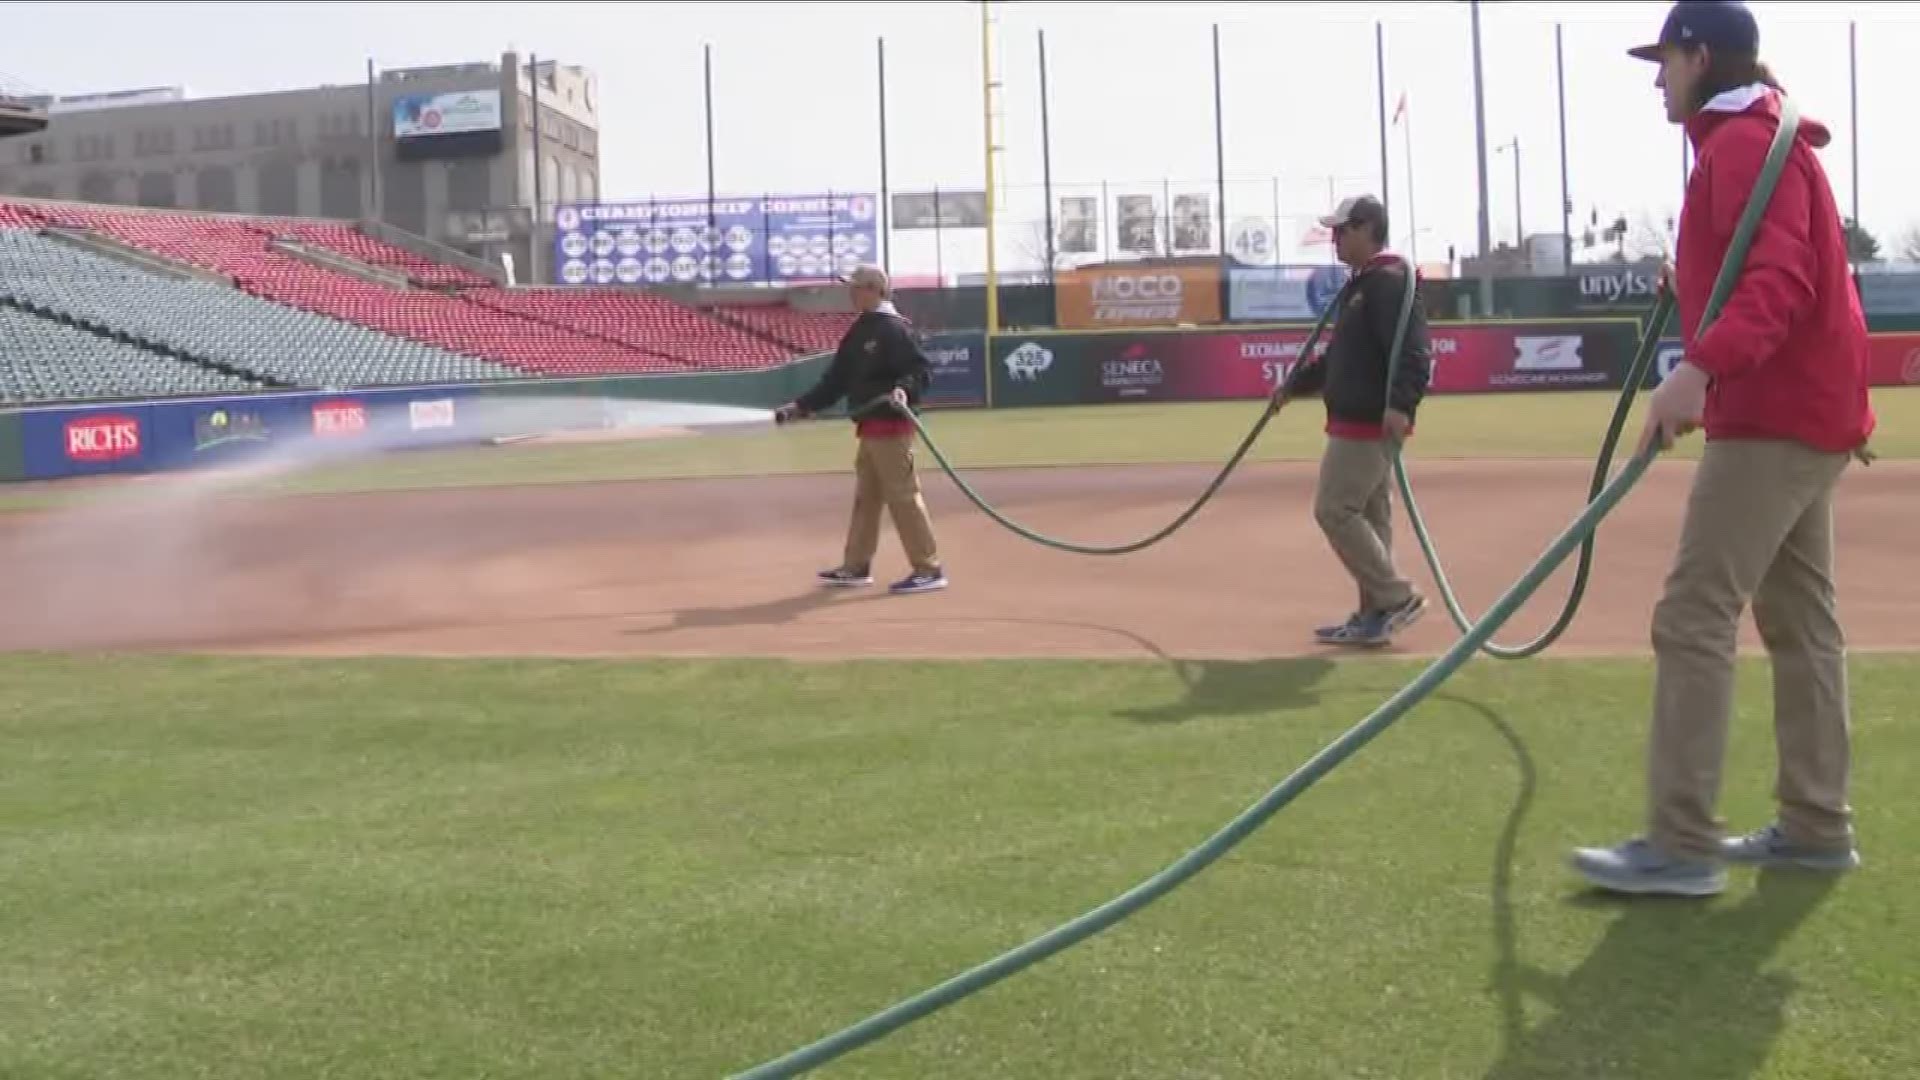 ground crew spent the morning  getting the ball park ready for opening day.